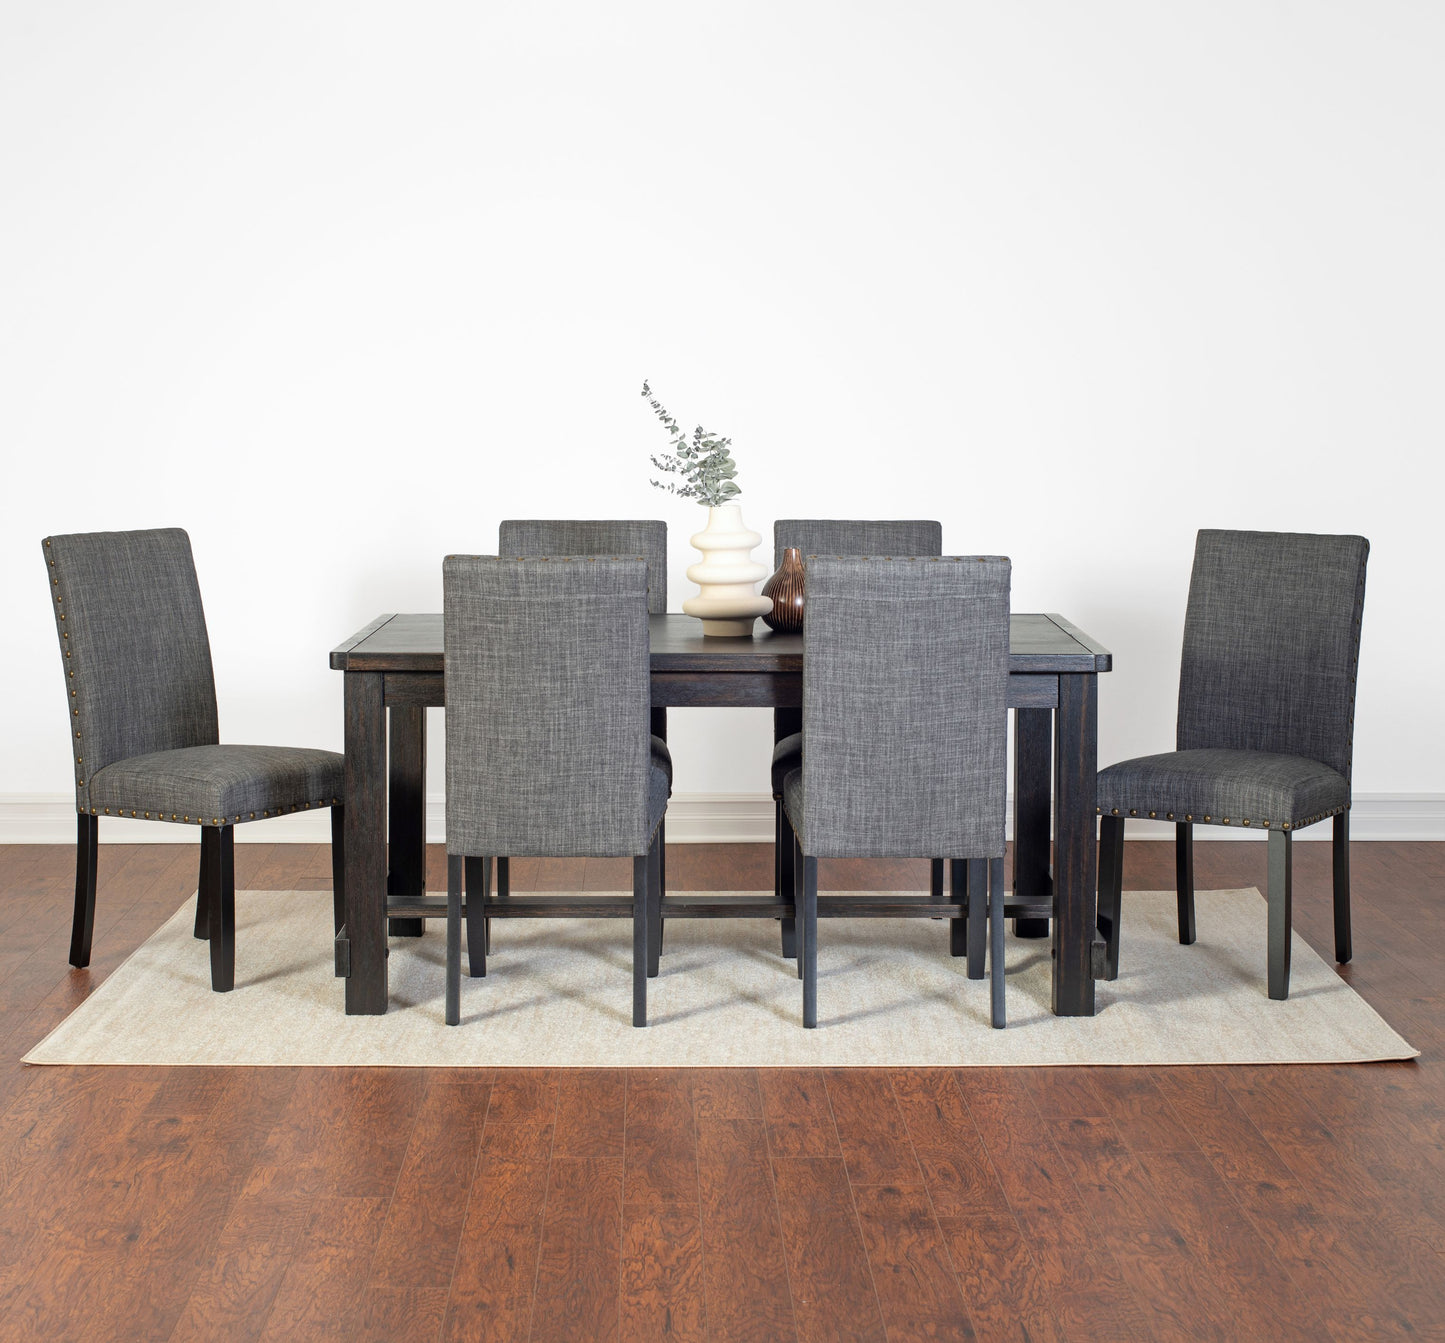 Muzzi Contemporary 7-Piece Dining Set, Dining Table with 6 Stylish Chairs